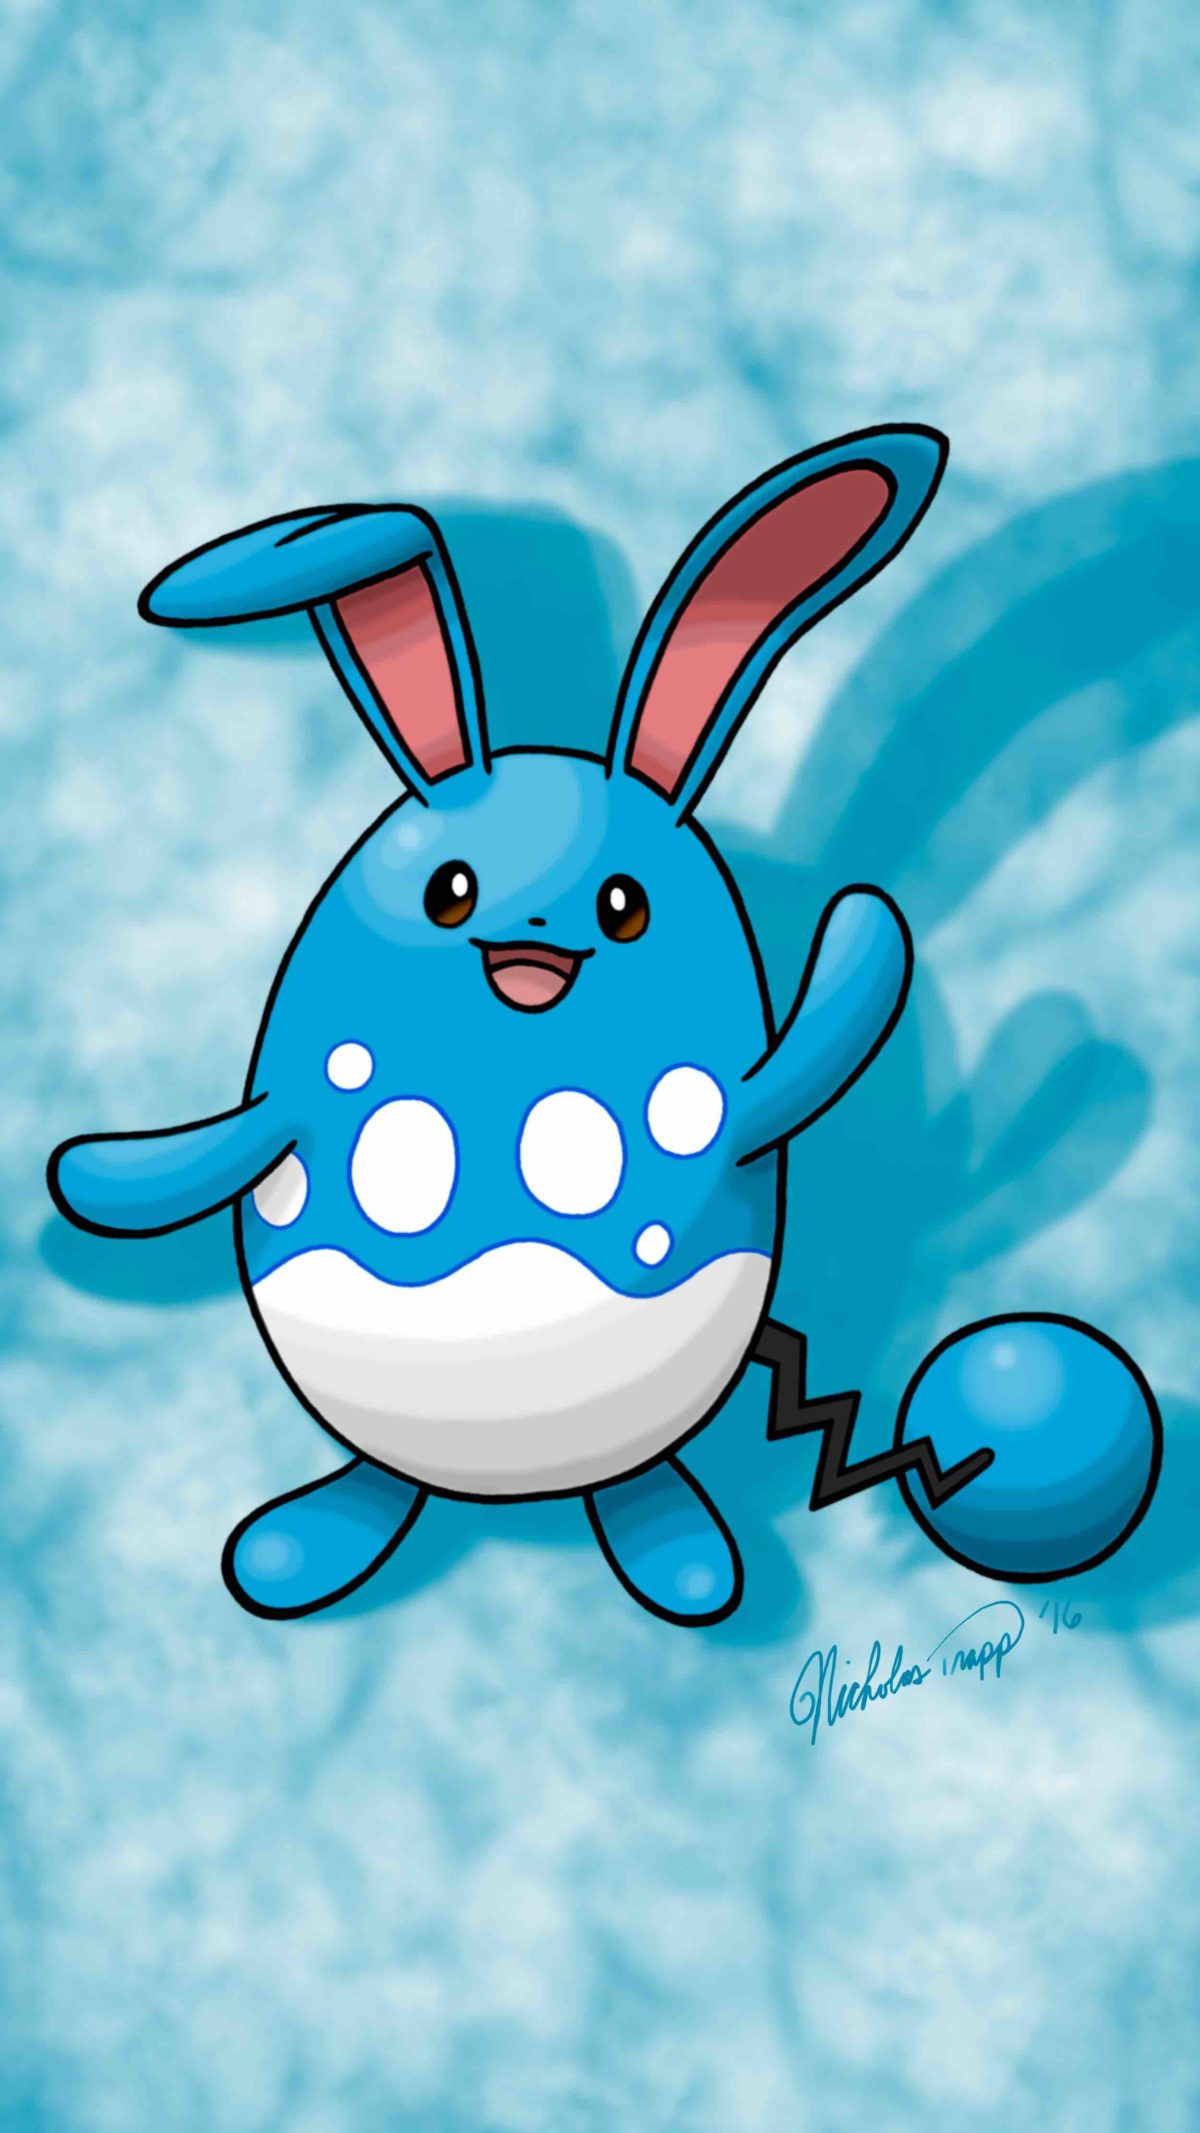 As requested here is the Azumarill Wallpaper | Pokémon | Pinterest …